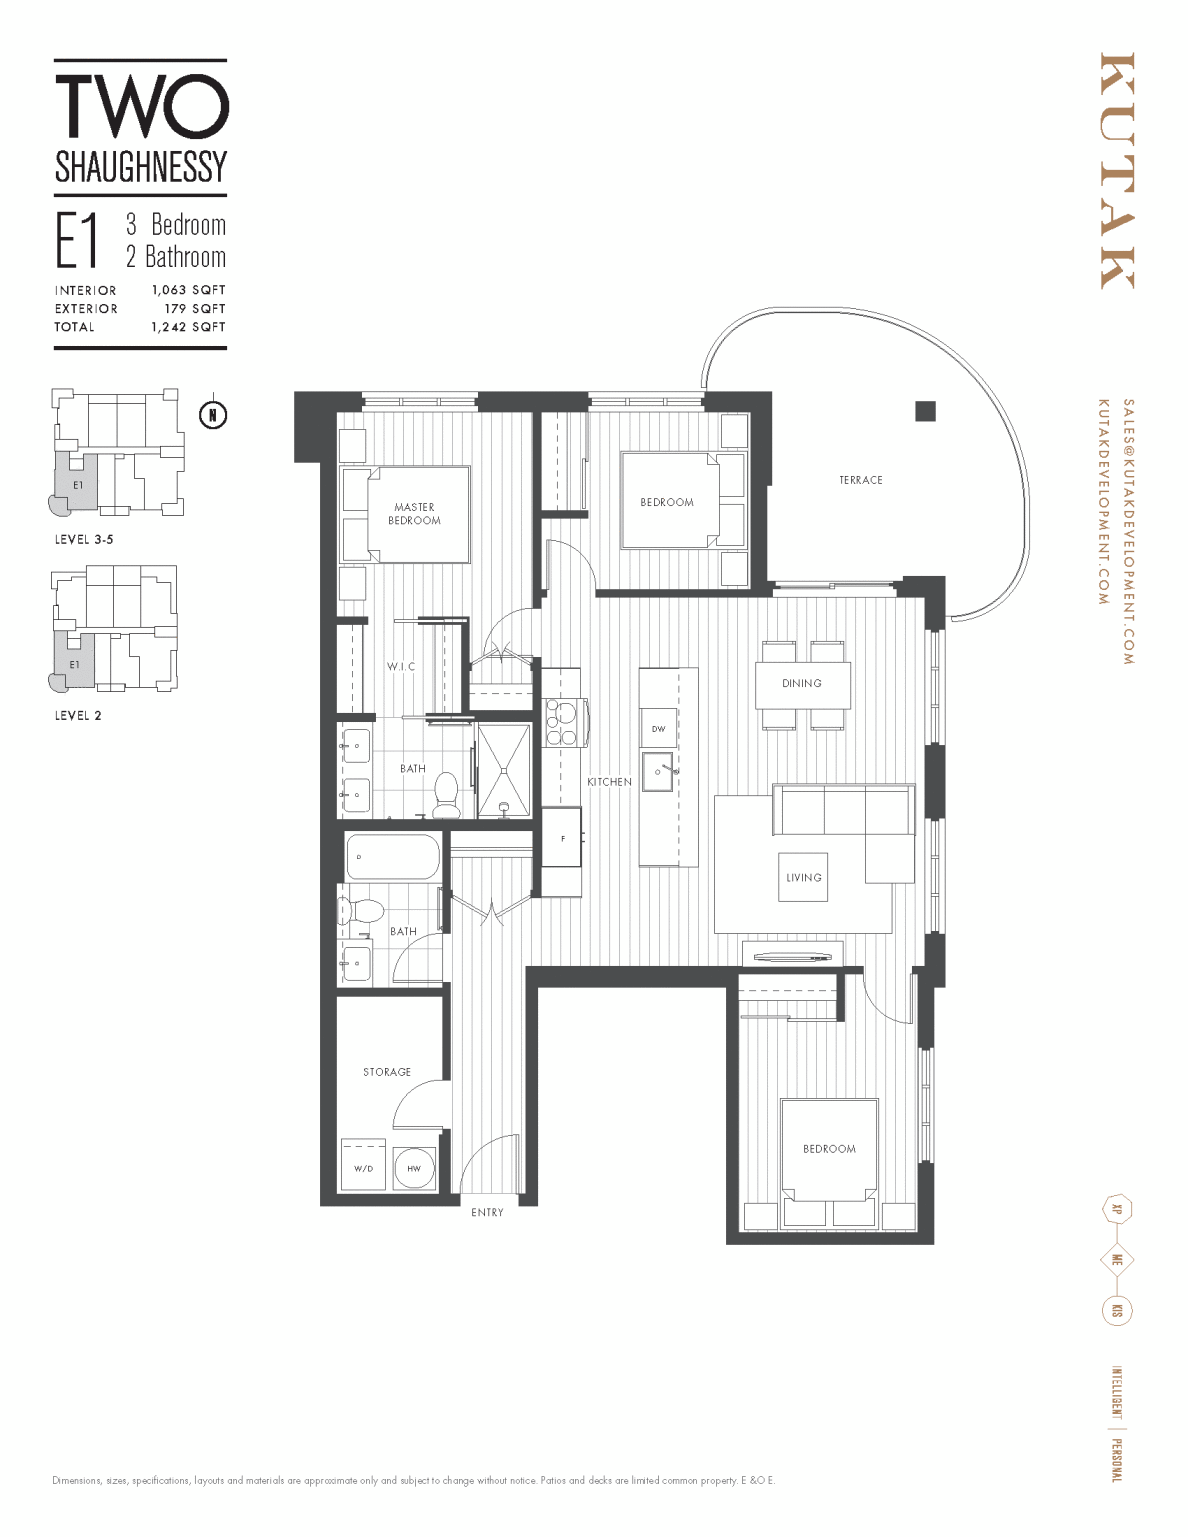 Two Shaughnessy Floor Plan E1